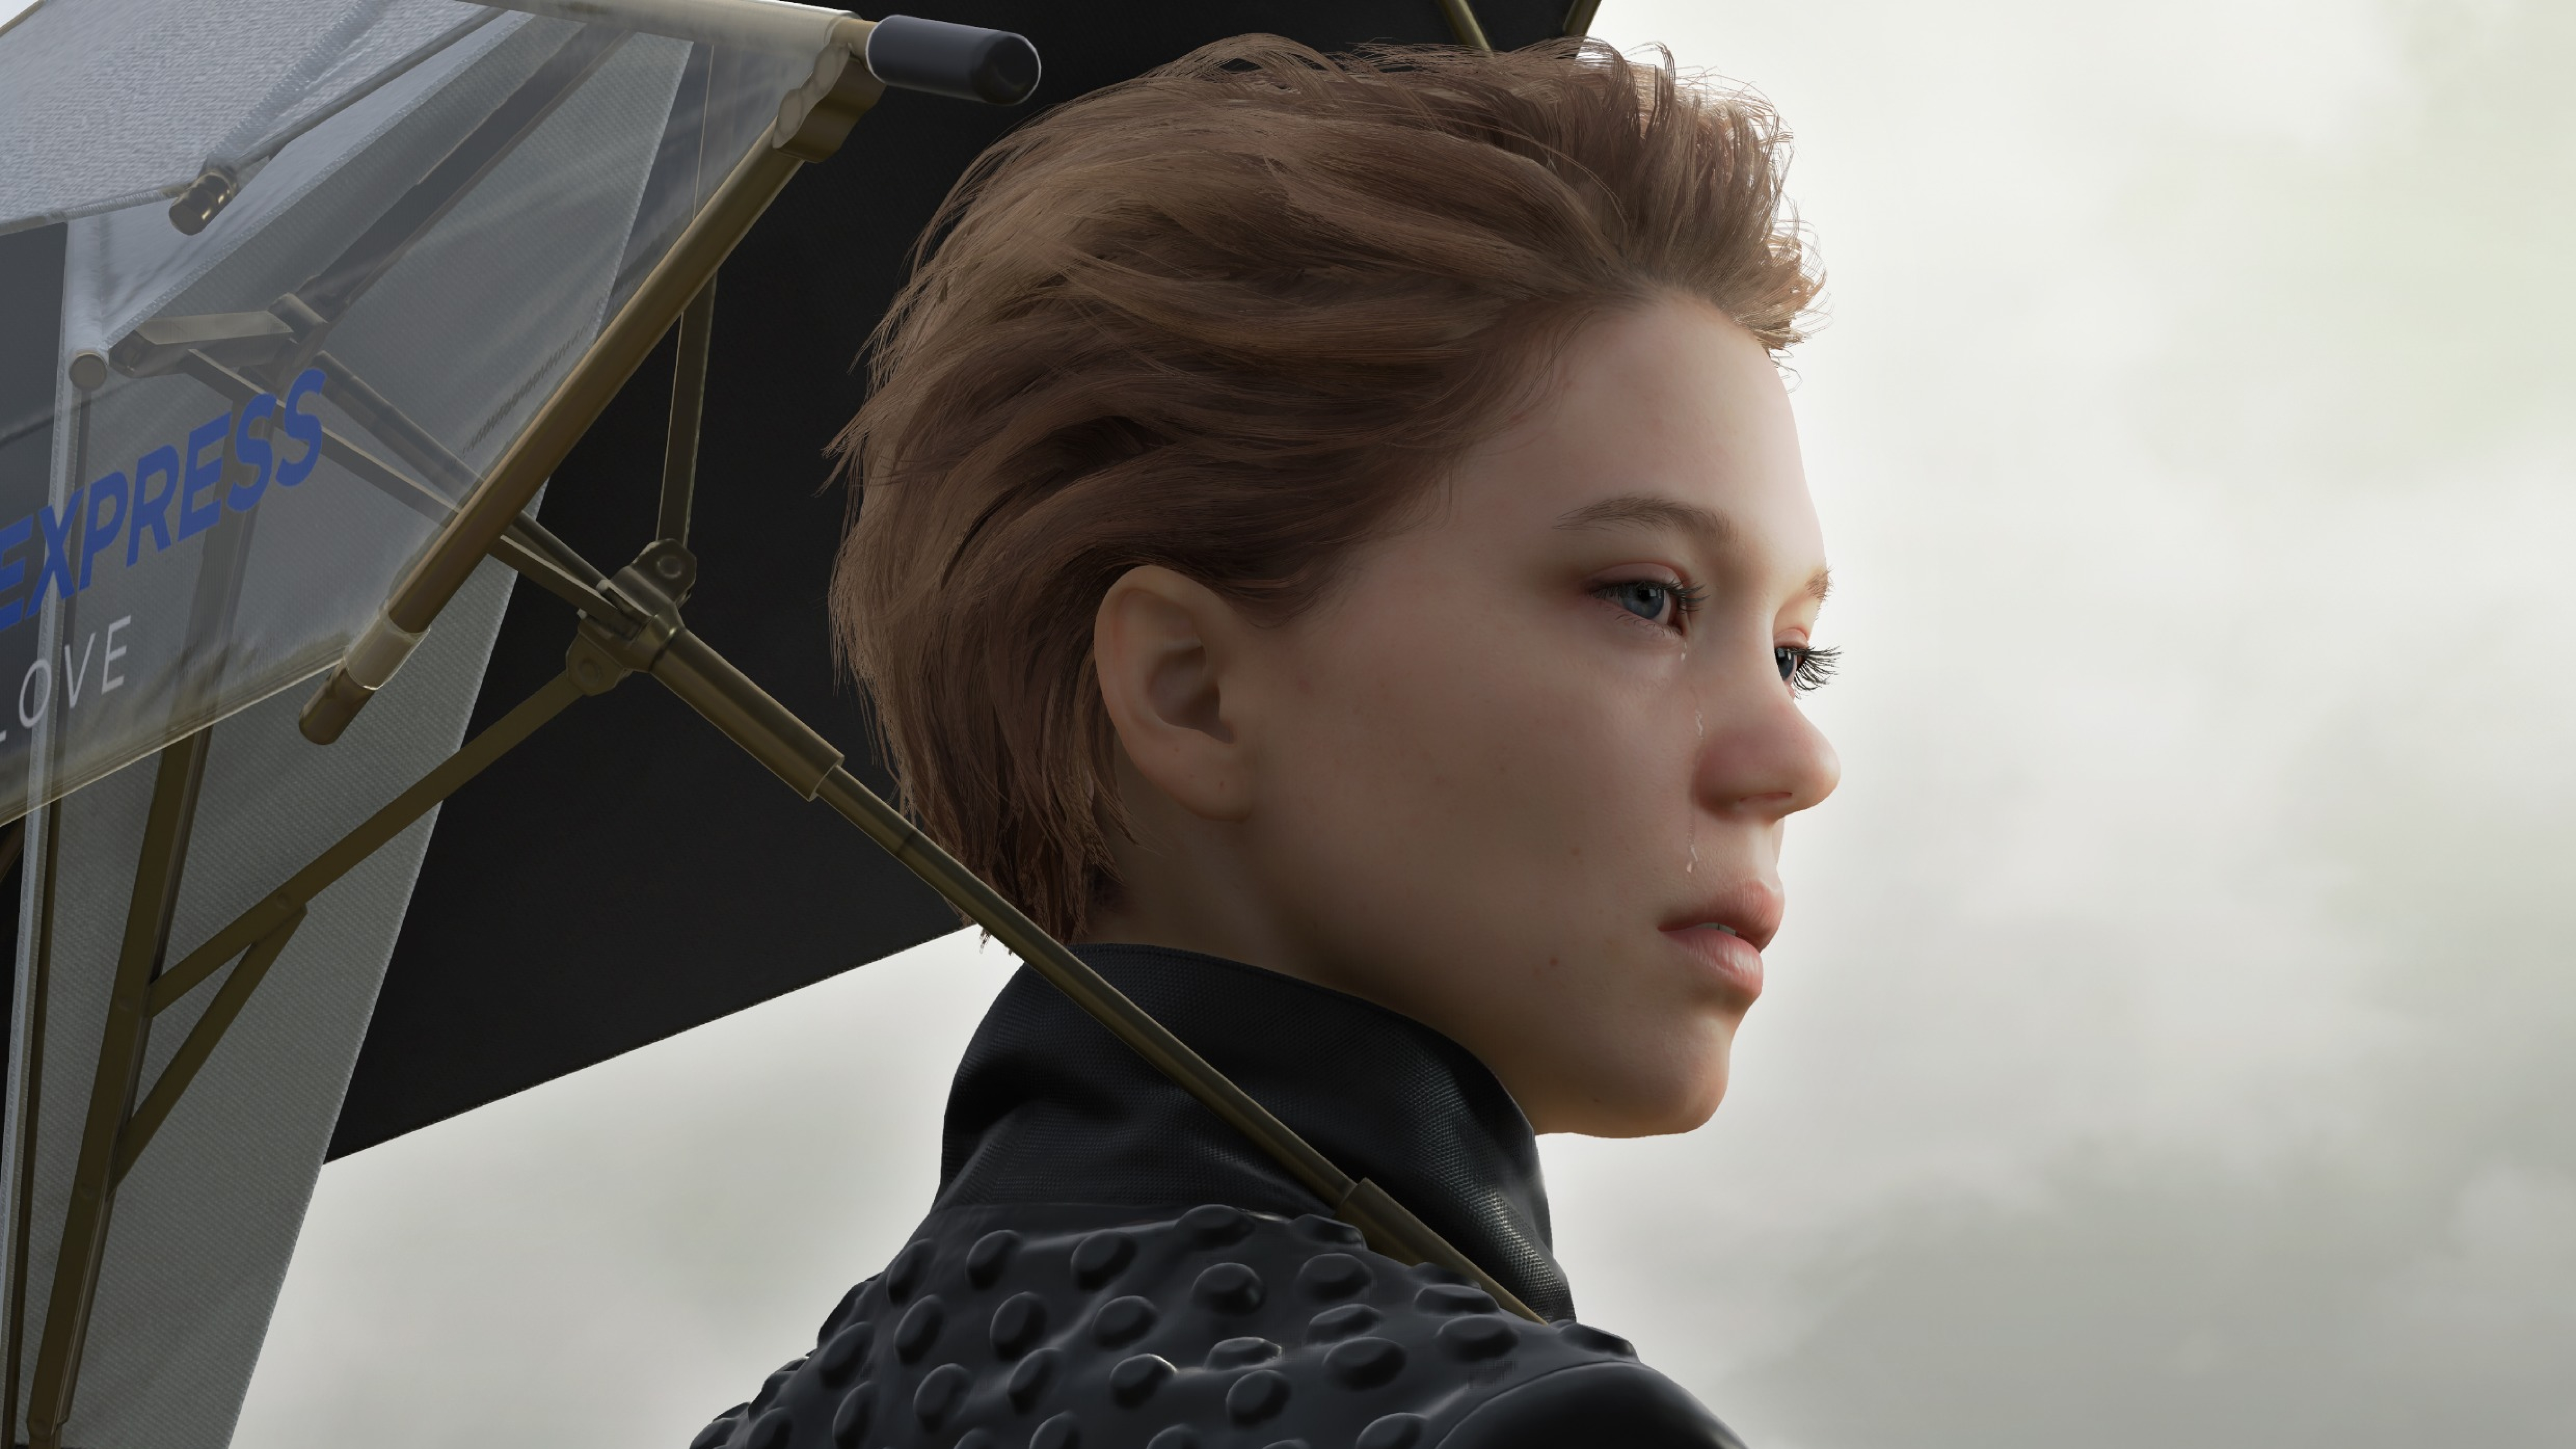 download death stranding game for free